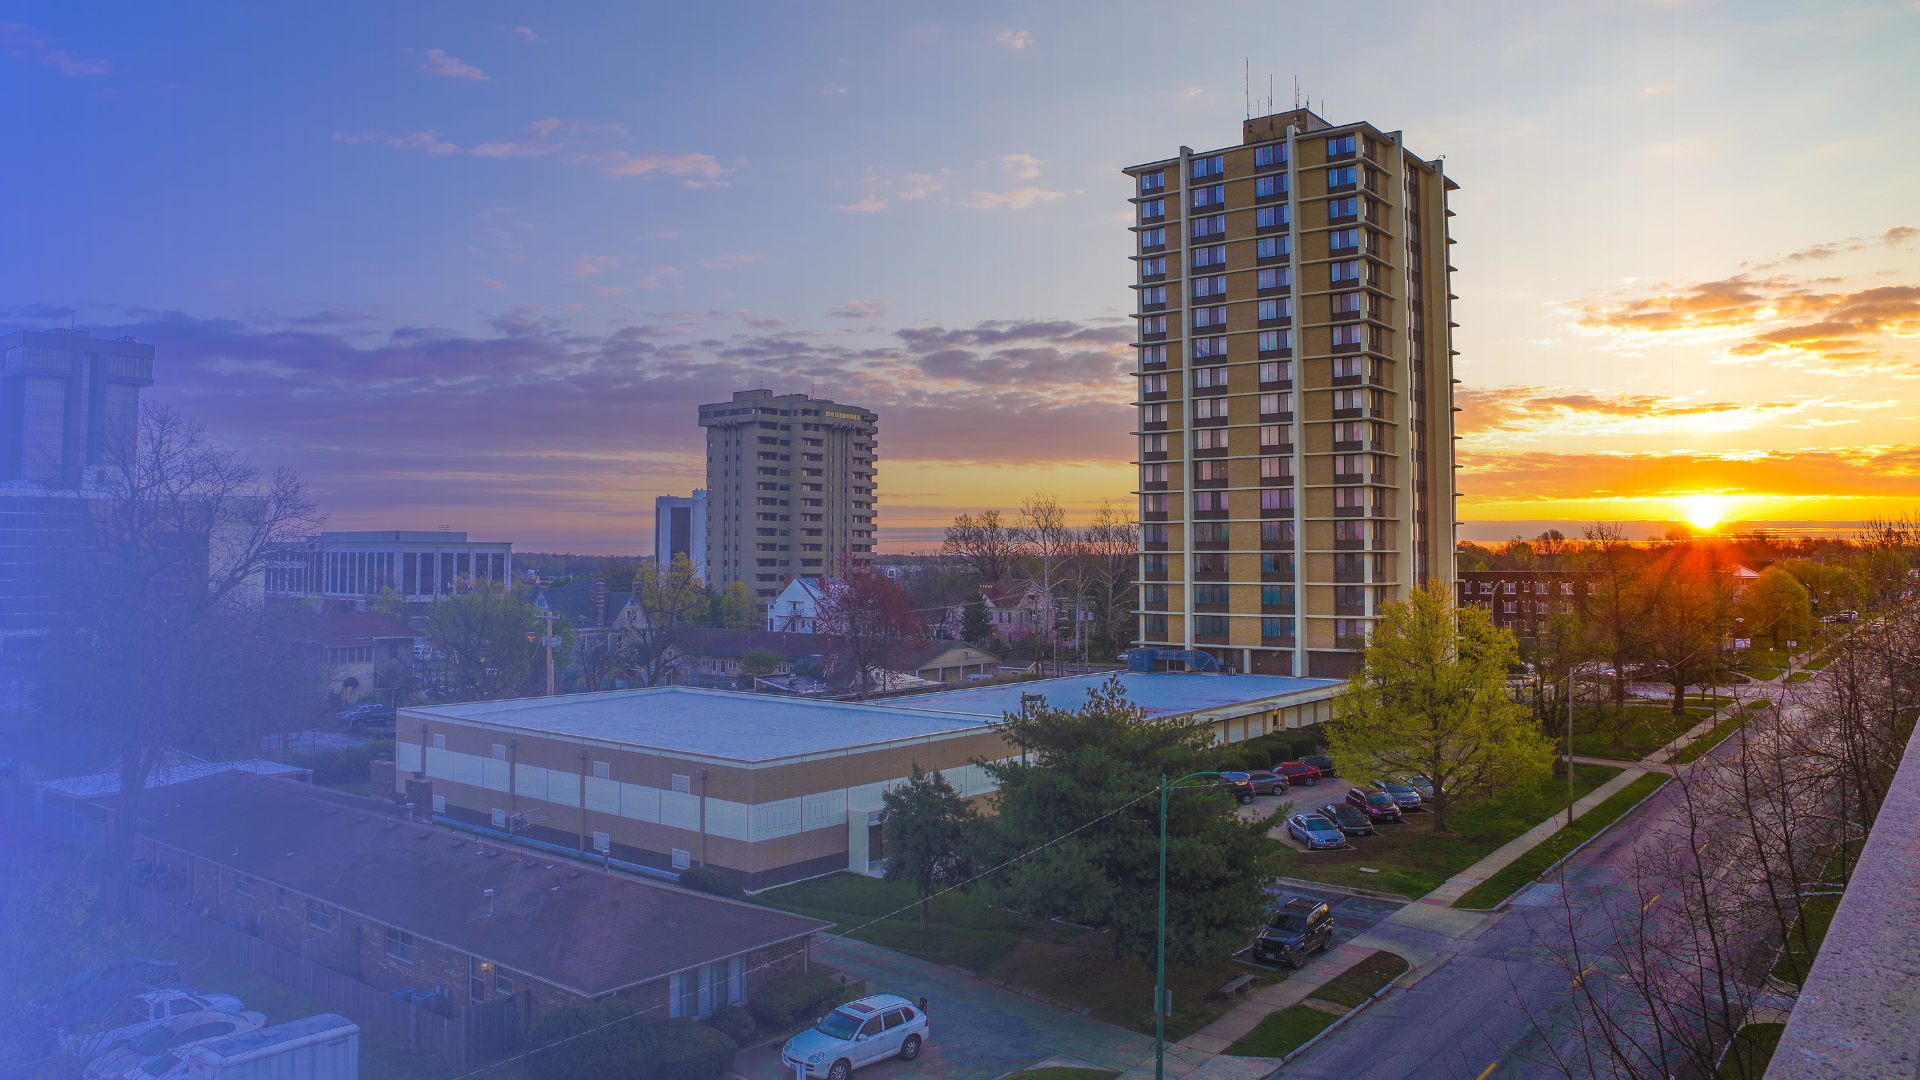 Picture of Sunvilla Tower on the Missouri State University campus with downtown Springfield, Missouri in the background.